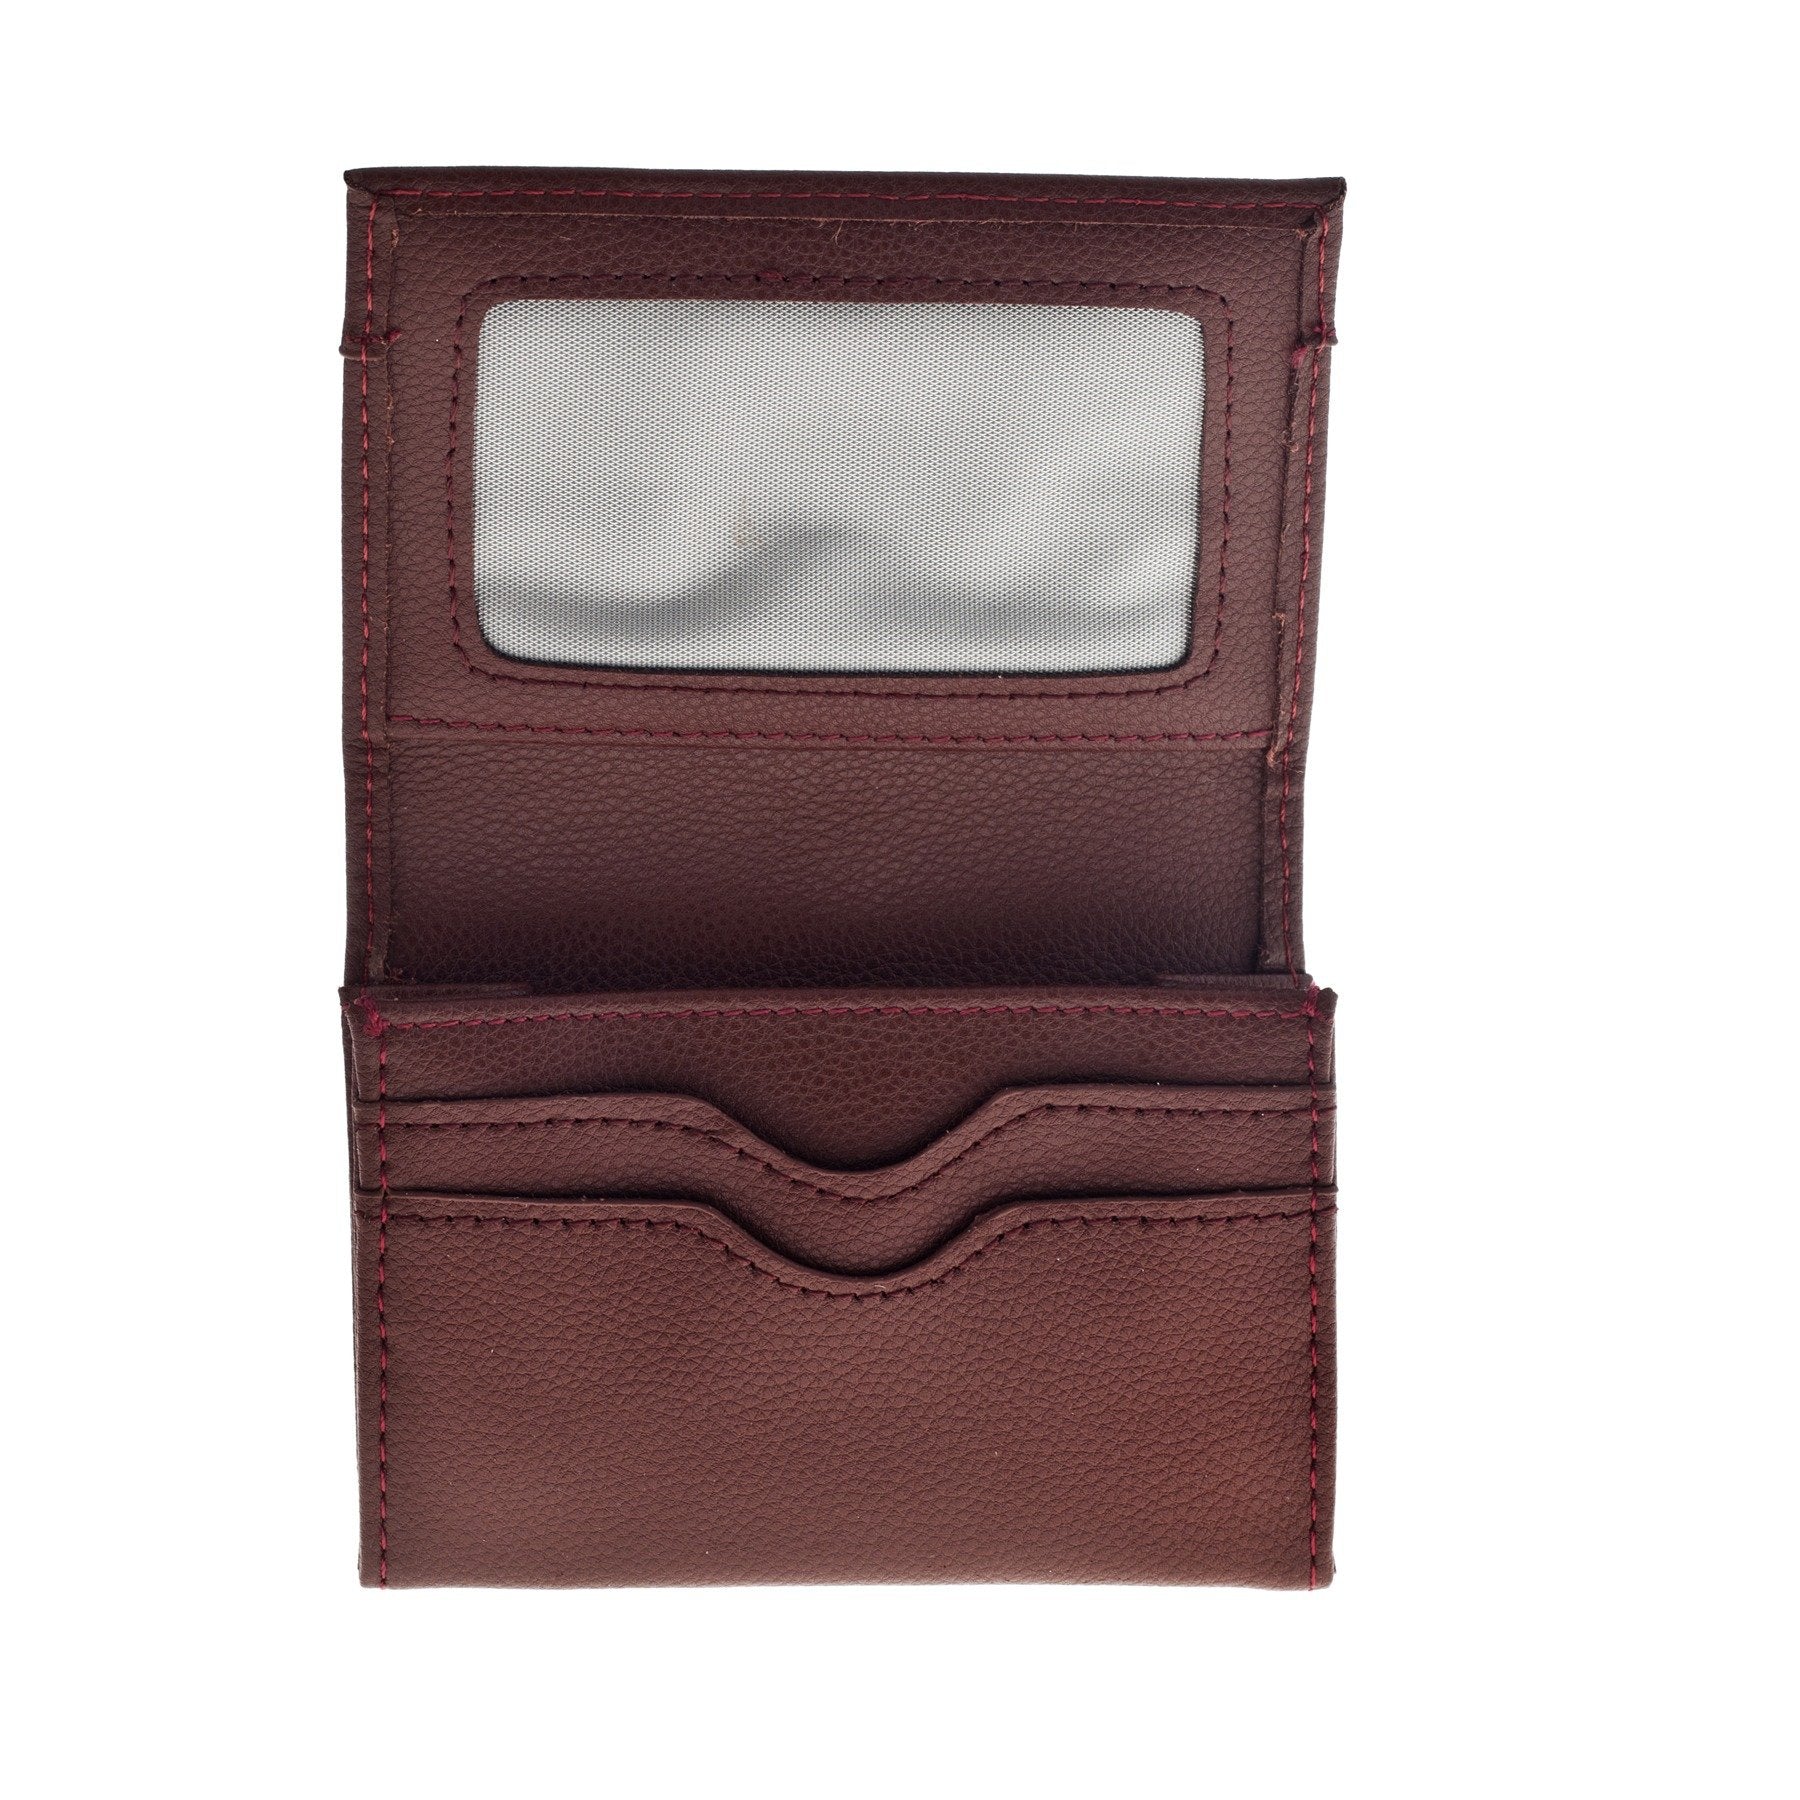 Hero Wallet James Series 450brn Better Than Leather